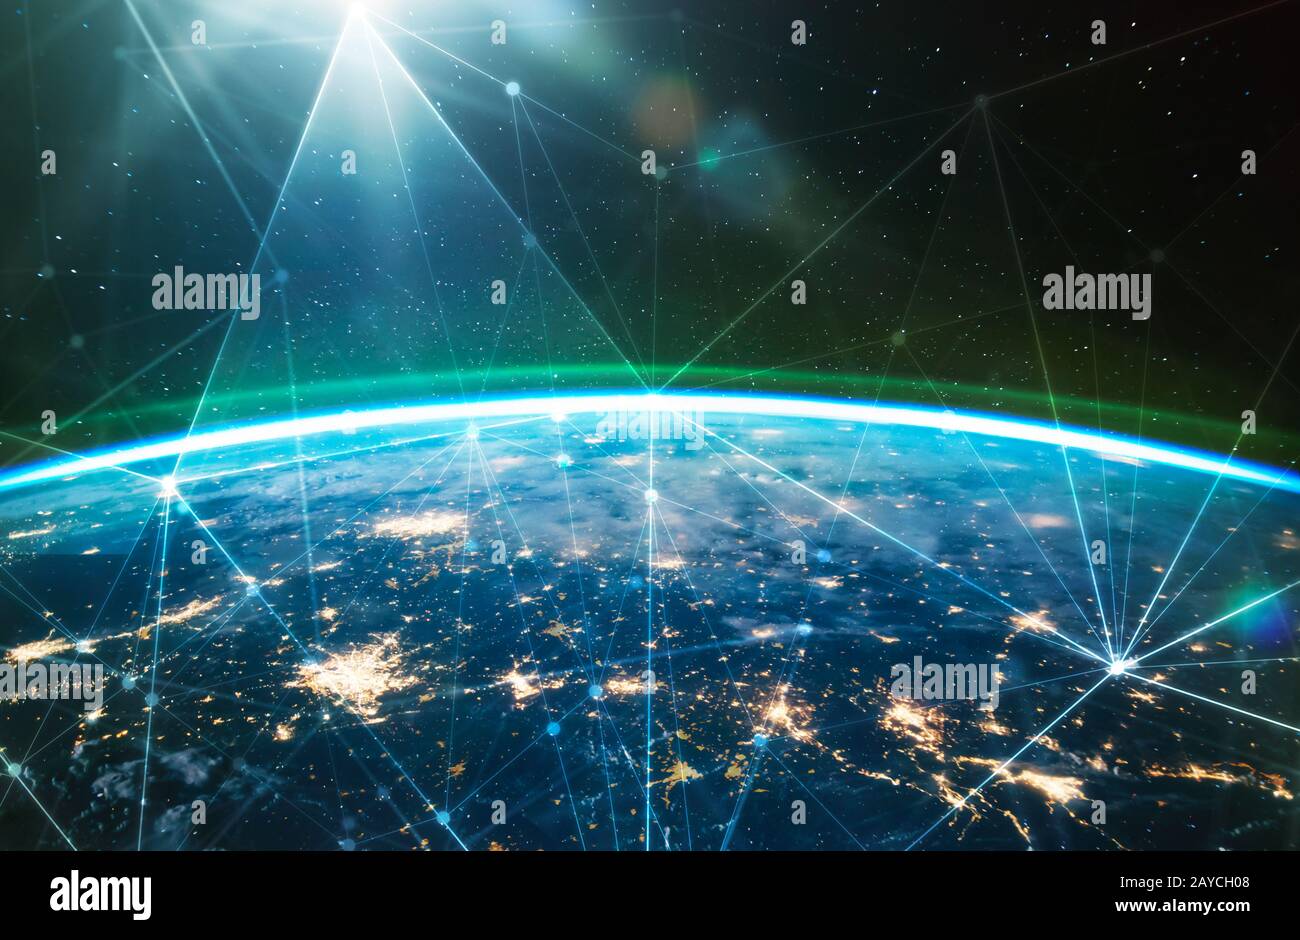 Network connected across planet Earth Stock Photo